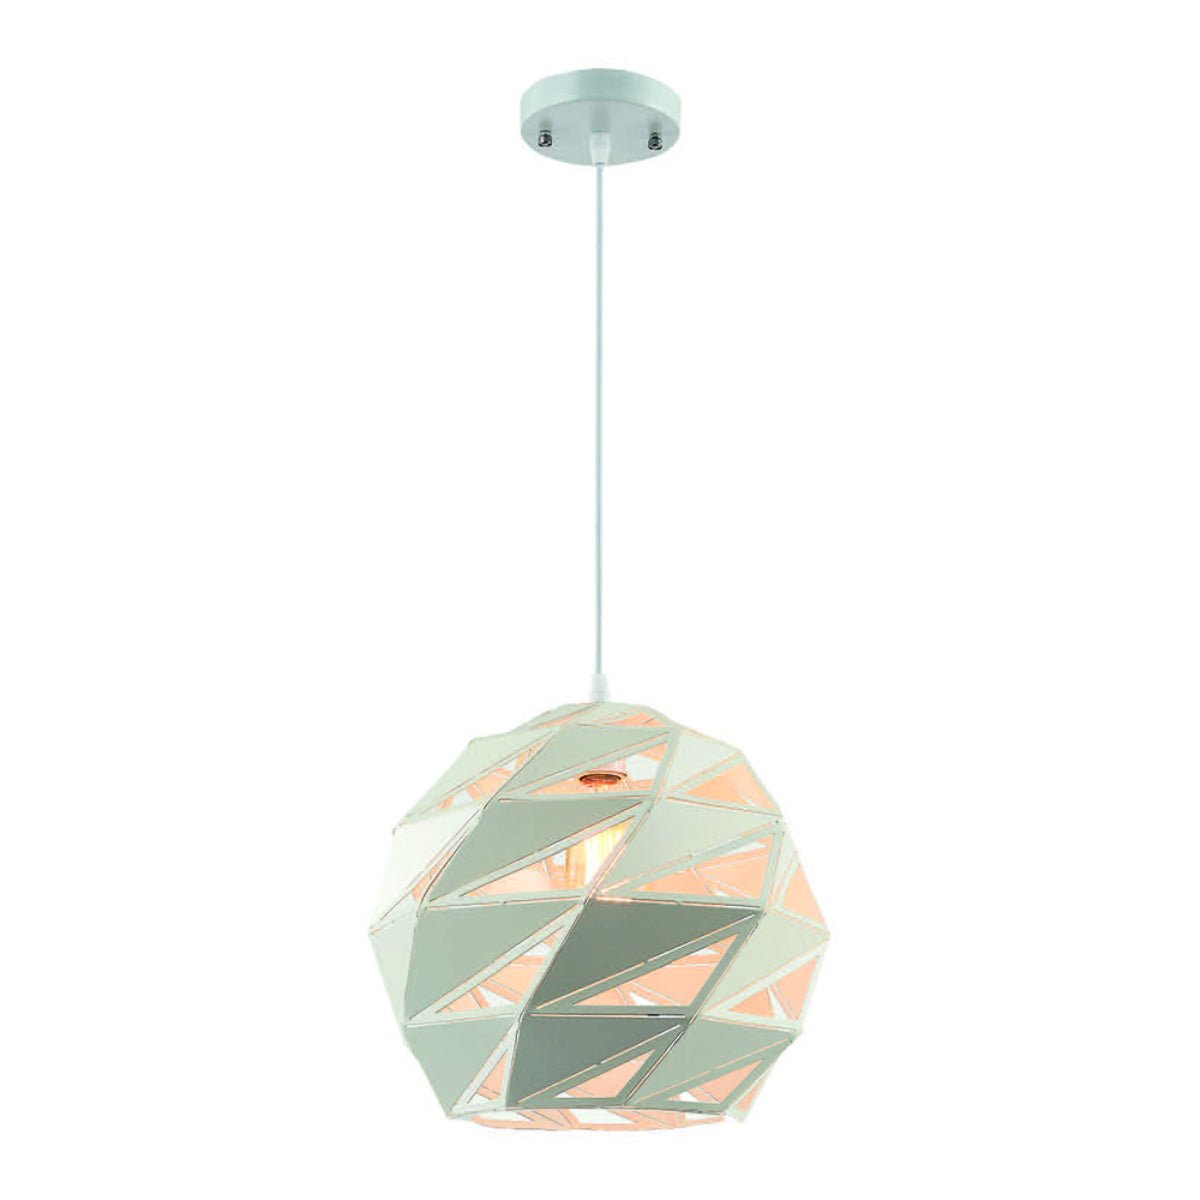 Main image of White Dome Laser Cut Metal Pendant Ceiling Light with E27 | TEKLED 150-17820